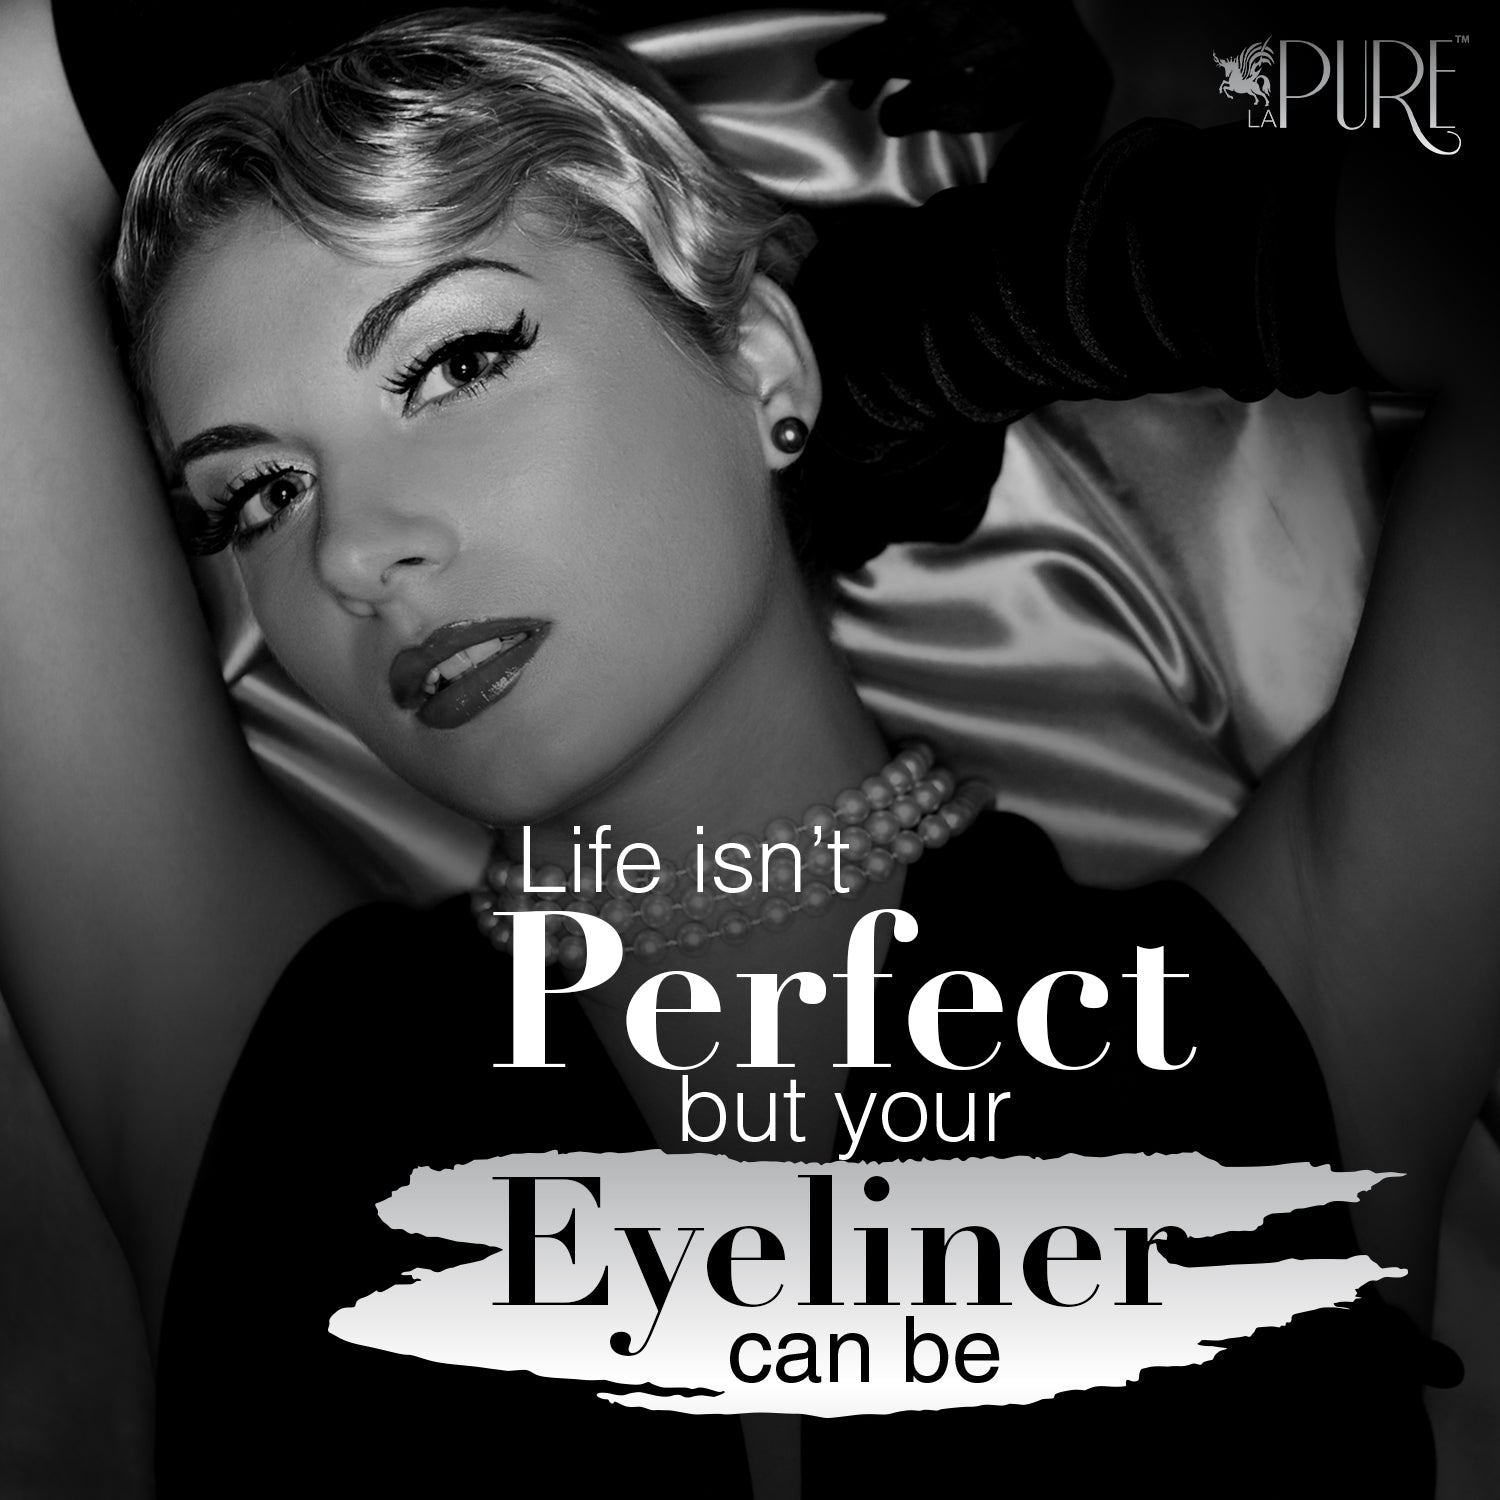 Life isn't perfect but your eyeliner can be